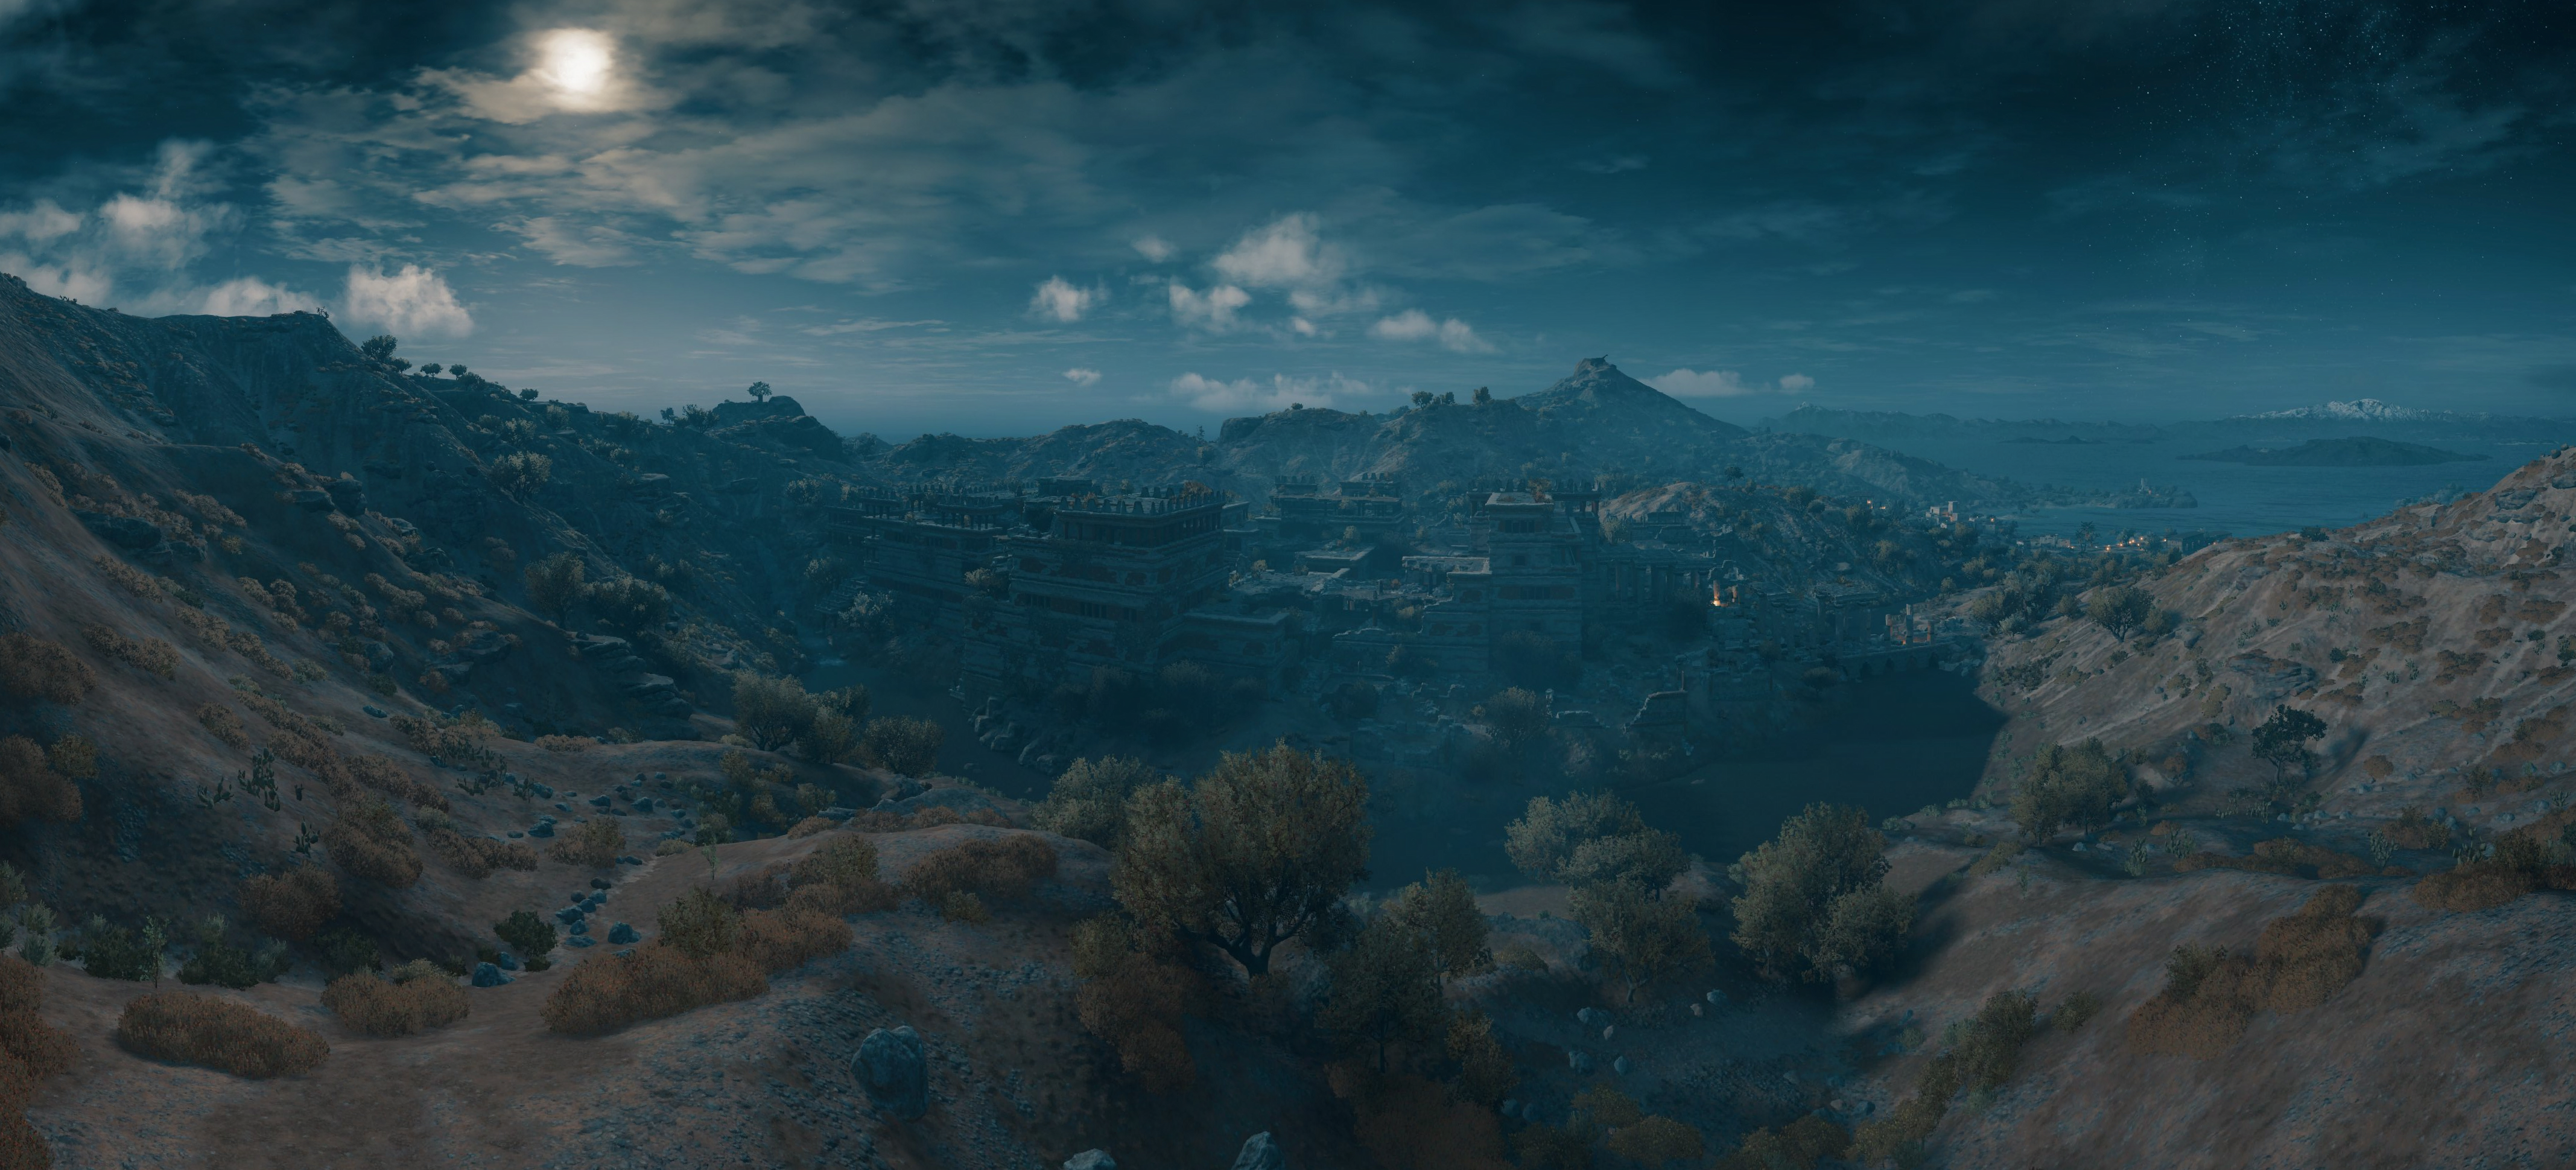 Assassin's Creed Odyssey Picture by RealPitchers